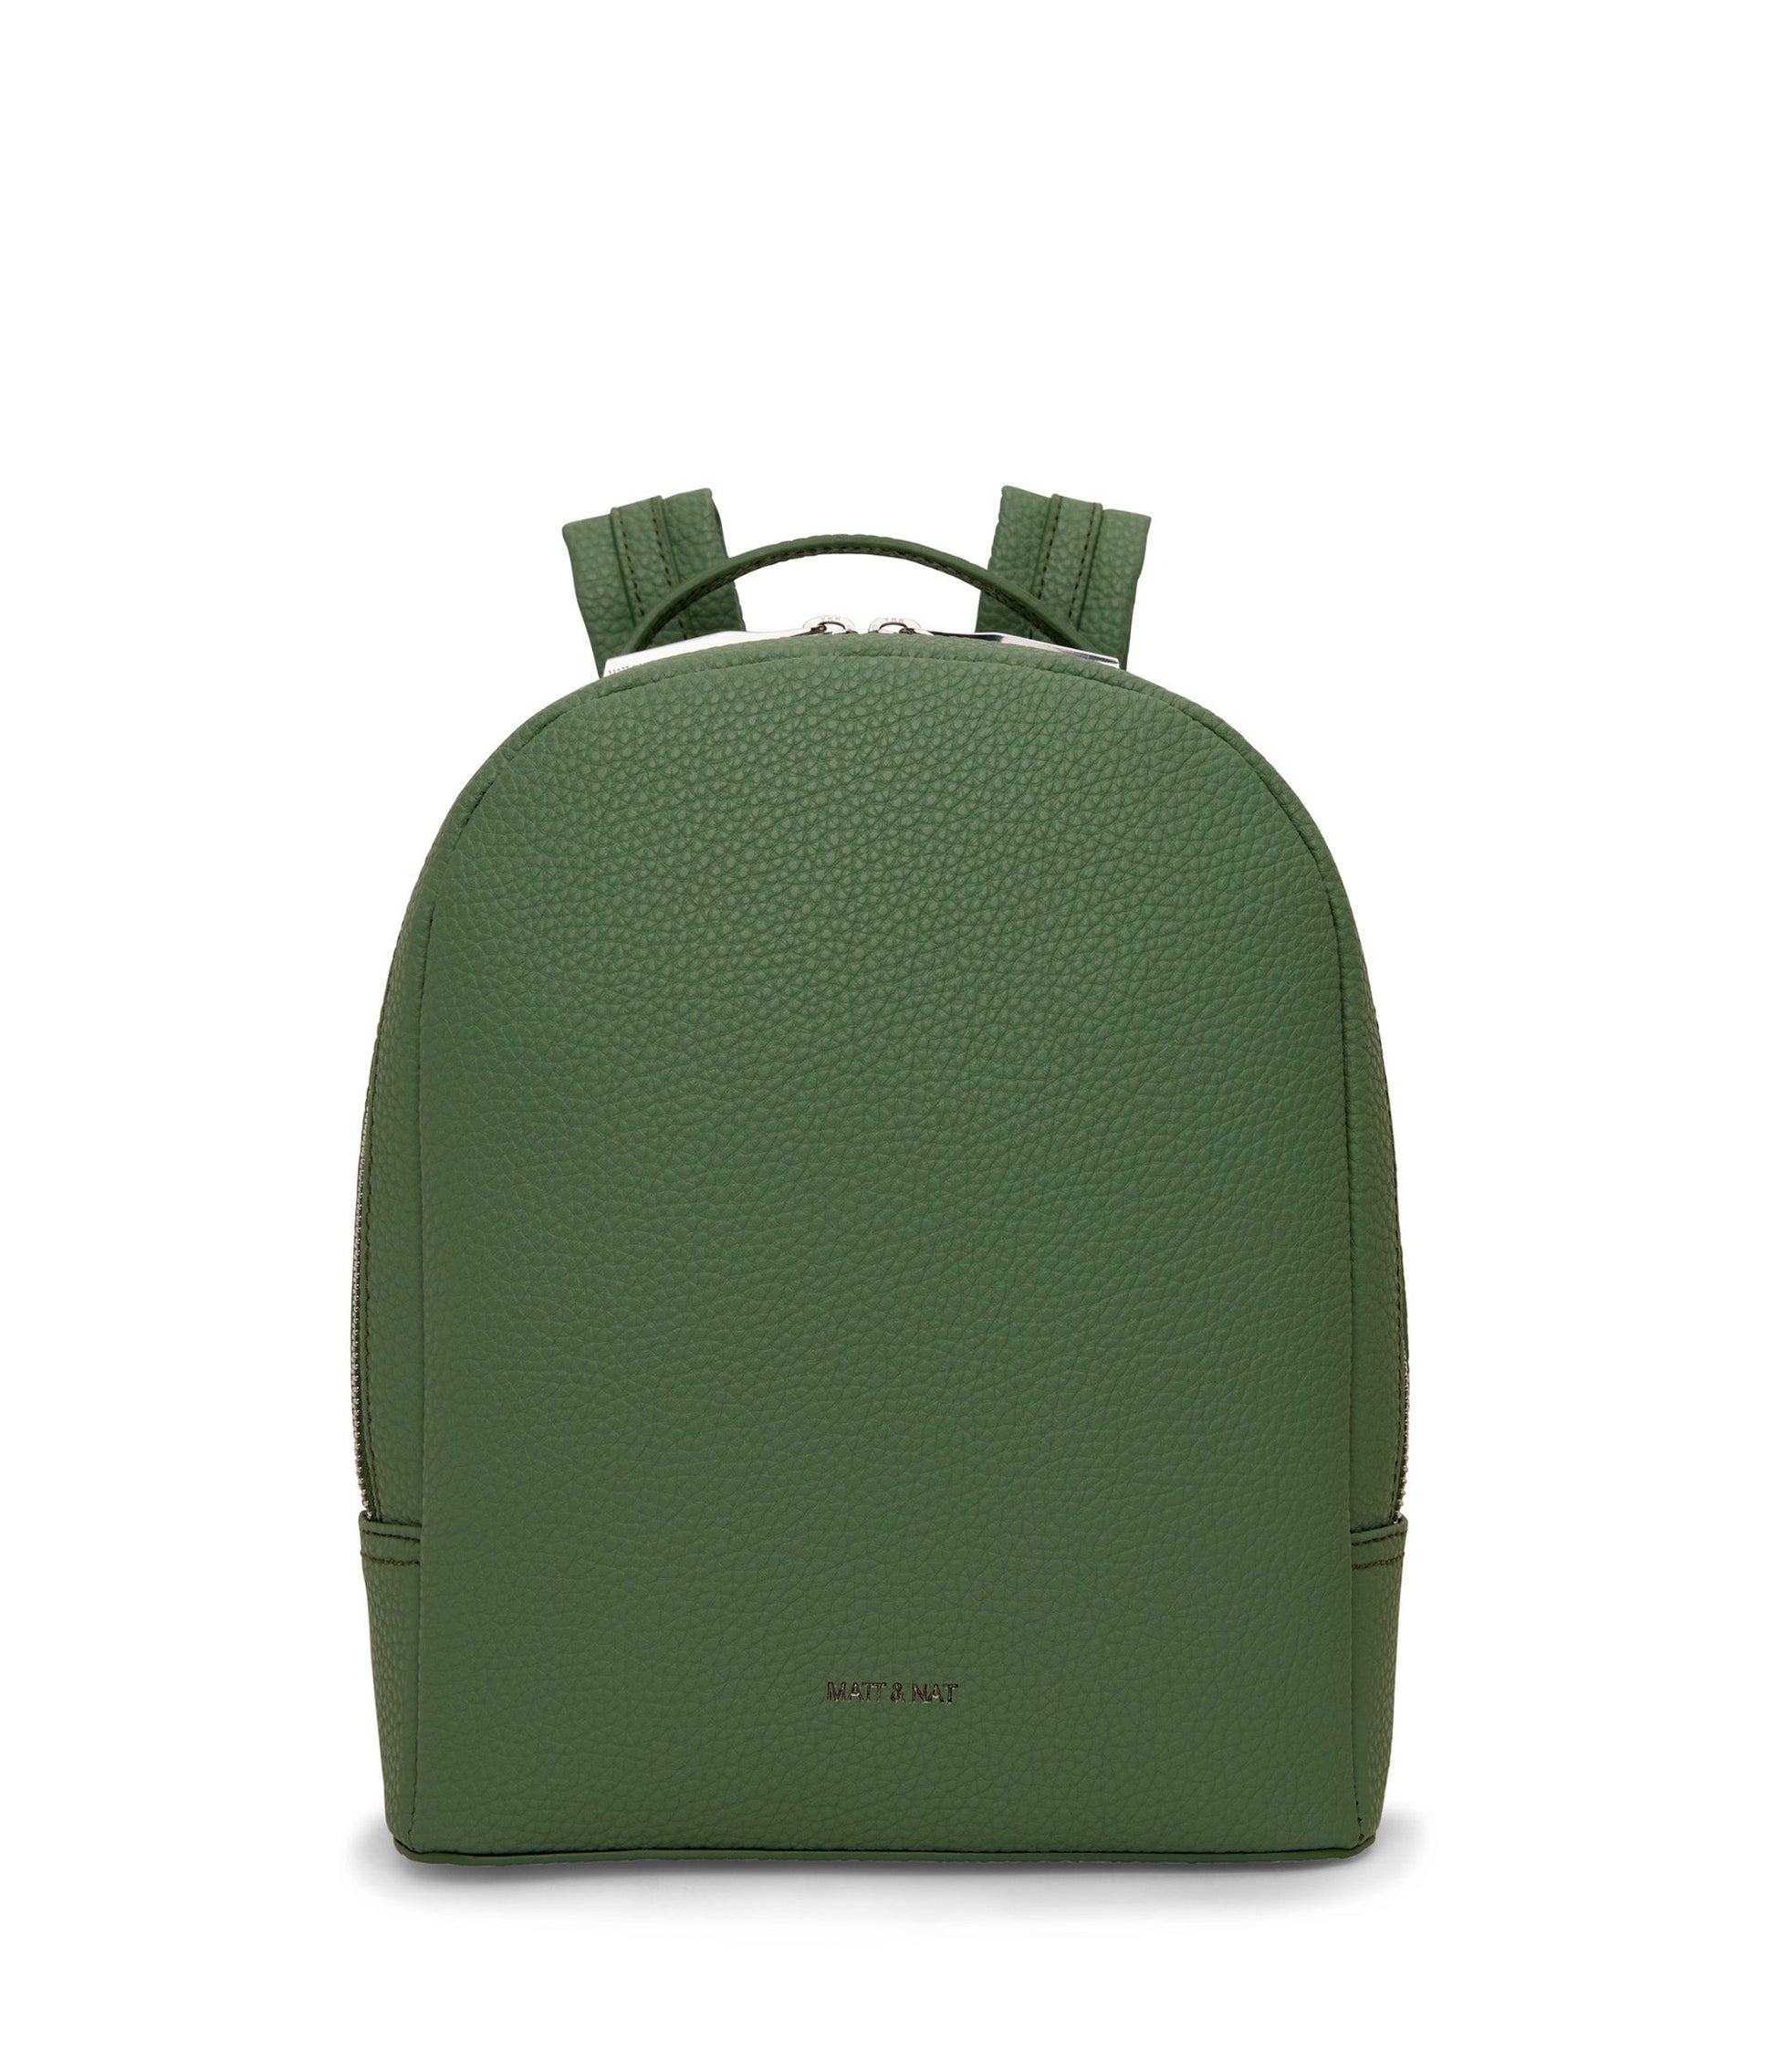 OLLY Vegan Backpack - Purity | Color: Green - variant::herb